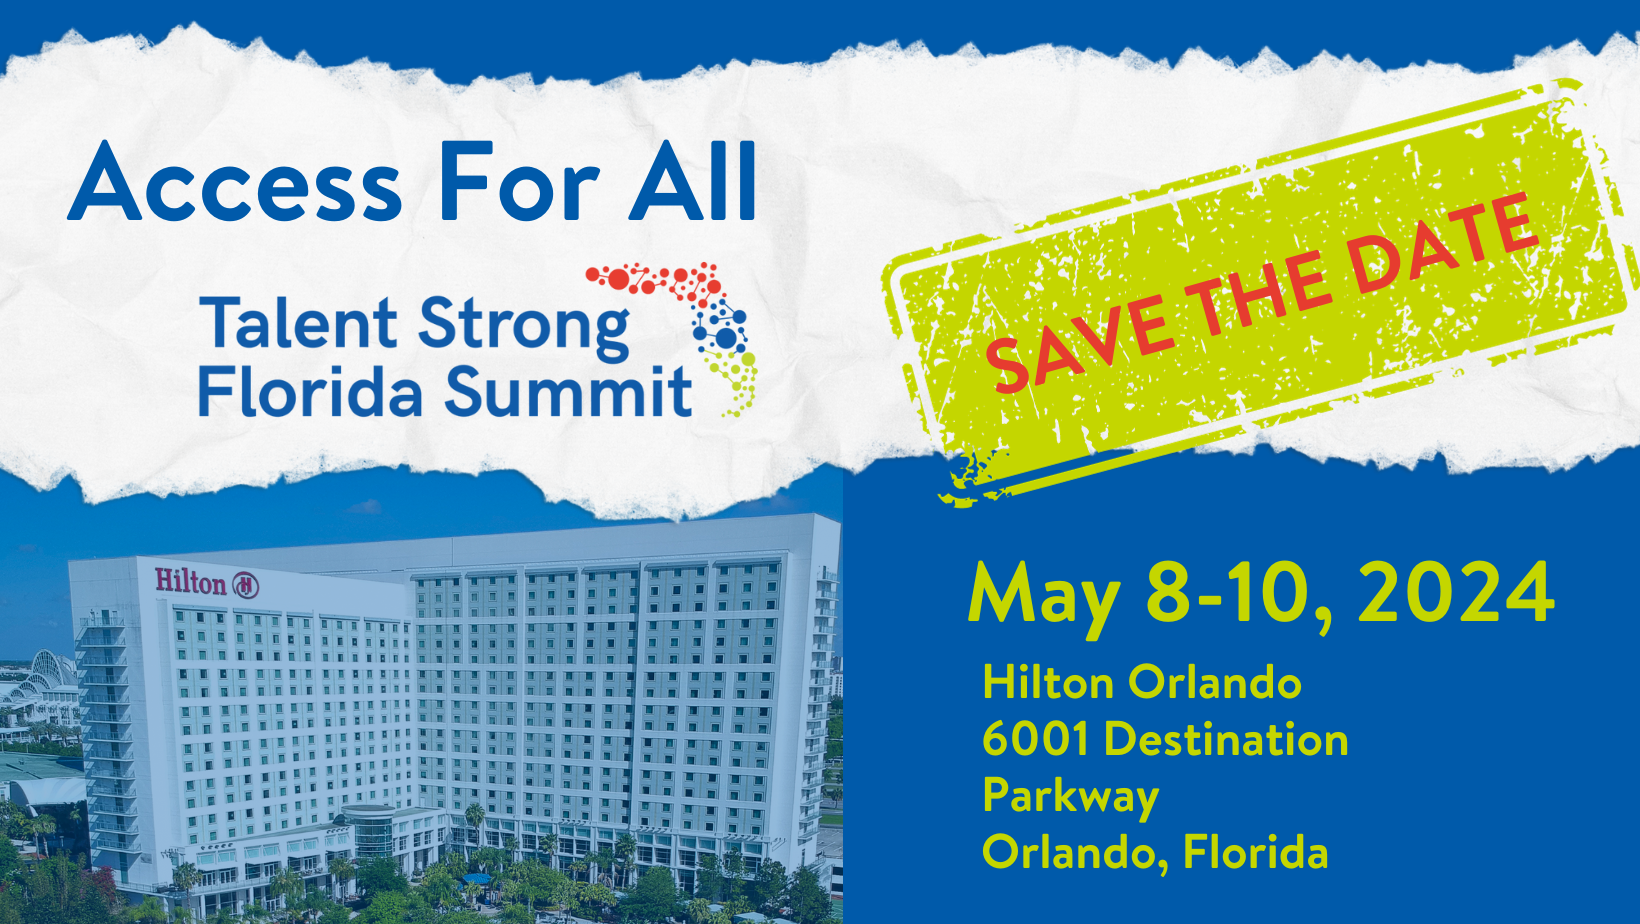 This Save the Date graphic promotes FCAN's next Talent Strong Florida Summit, Access for all host May 9-10, 2024 at the Hilton, Orlando.